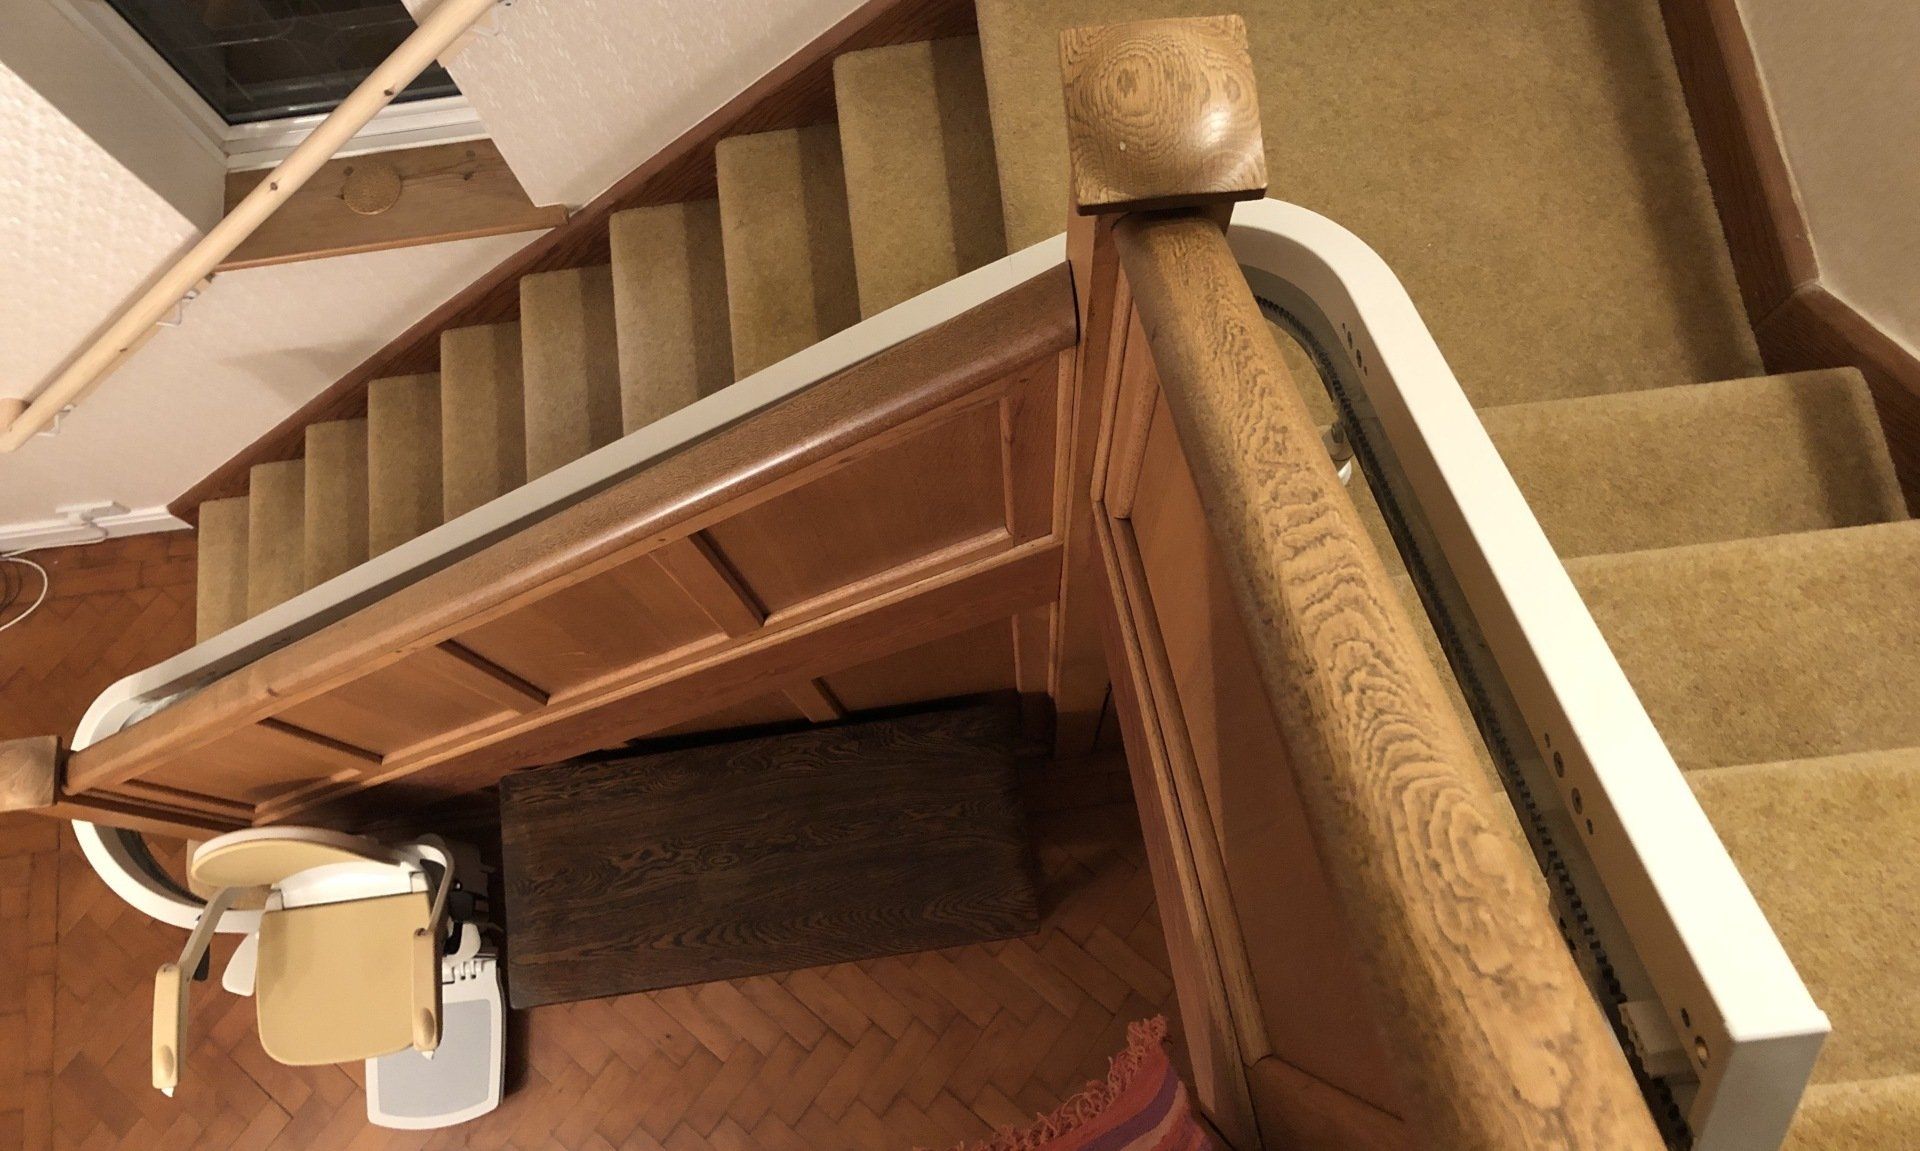 What price is a stairlift installation?